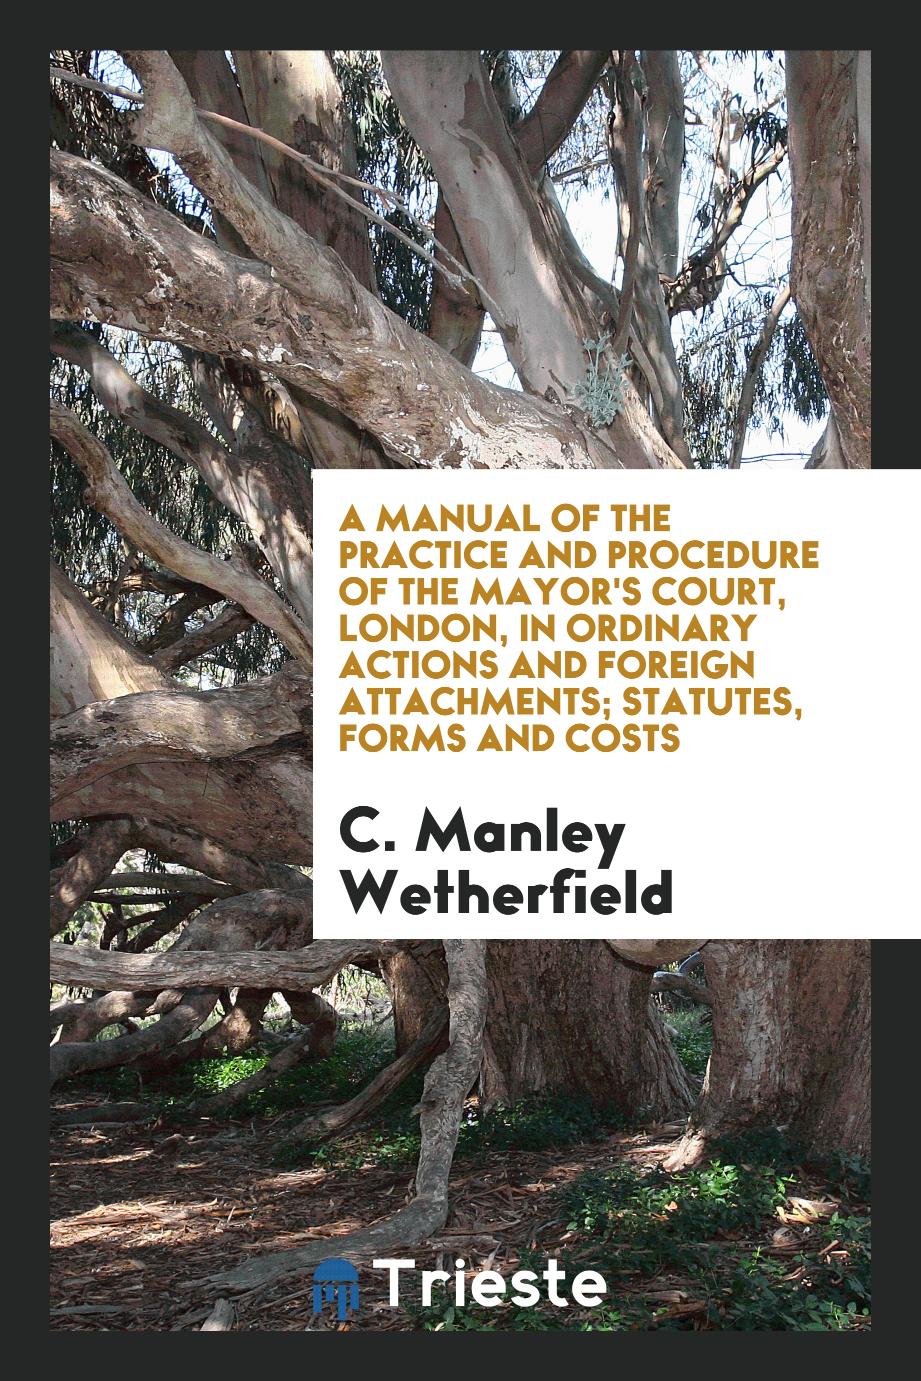 A Manual of the Practice and Procedure of the Mayor's Court, London, in Ordinary Actions and Foreign Attachments; Statutes, Forms and Costs